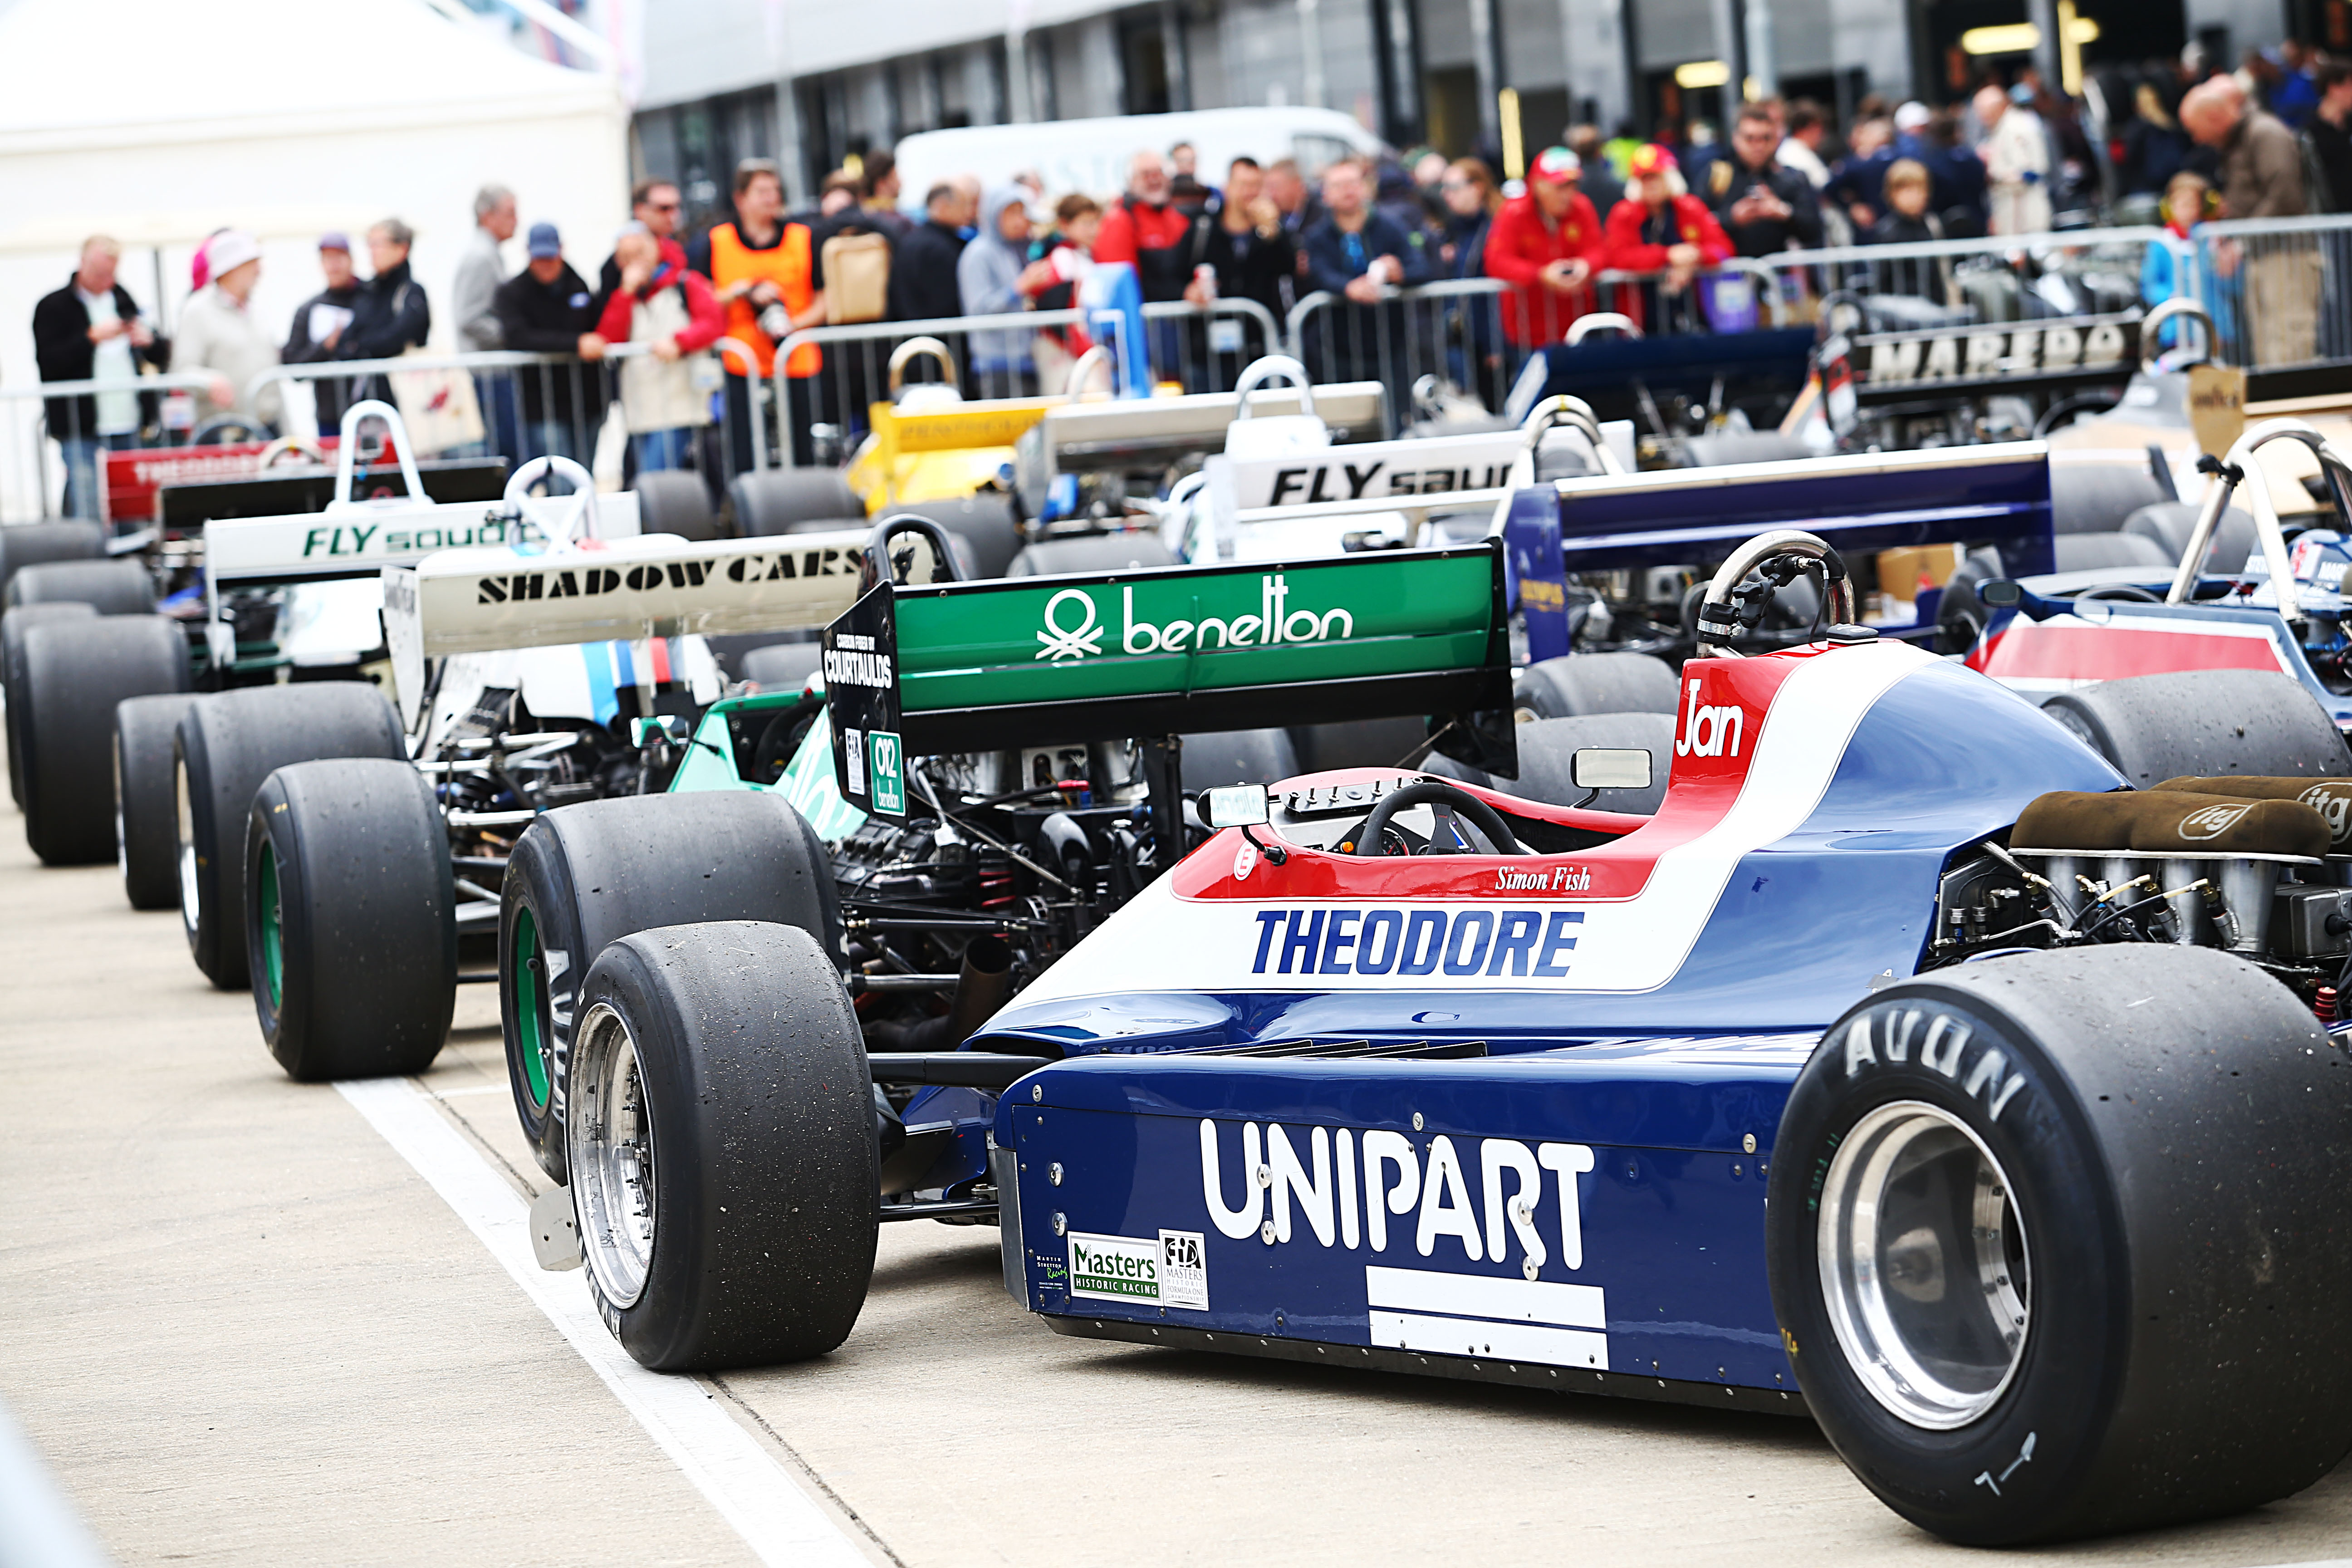 Vintage racing, Silverstone celebrates 70th anniversary, ClassicCars.com Journal